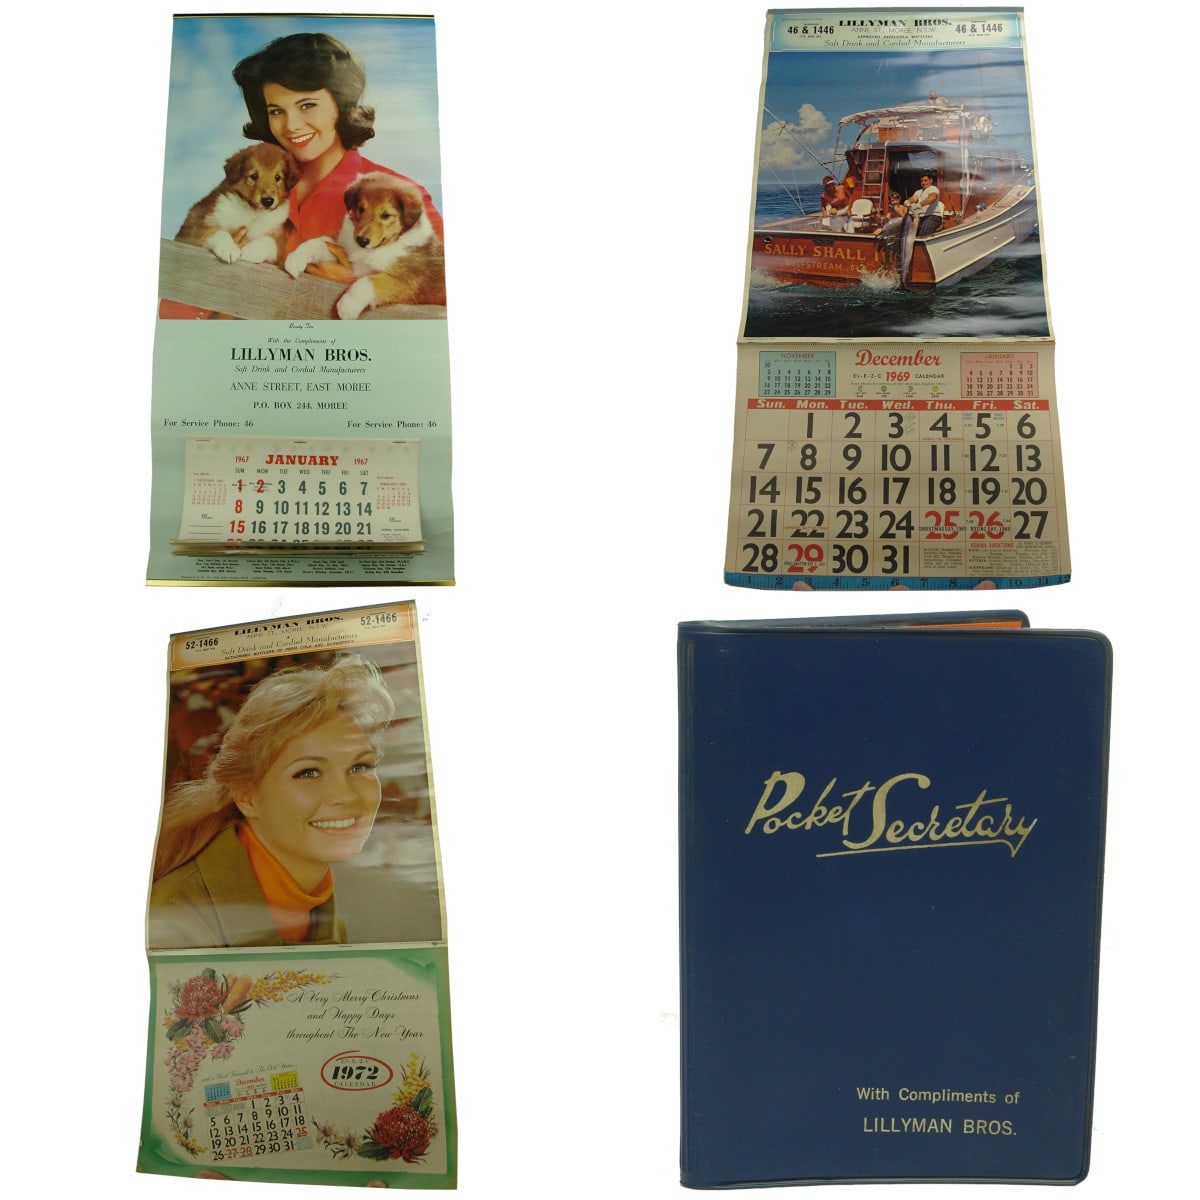 4 Items. 3 Advertising Calendars & a Notebook. Lillyman Bros., Anne Street, Moree. Soft Drink & Cordial Manufacturers. 1967, 1969 & 1972. Small Notebook. Pocket Secretary with compliments of Lillyman Bros (New South Wales)